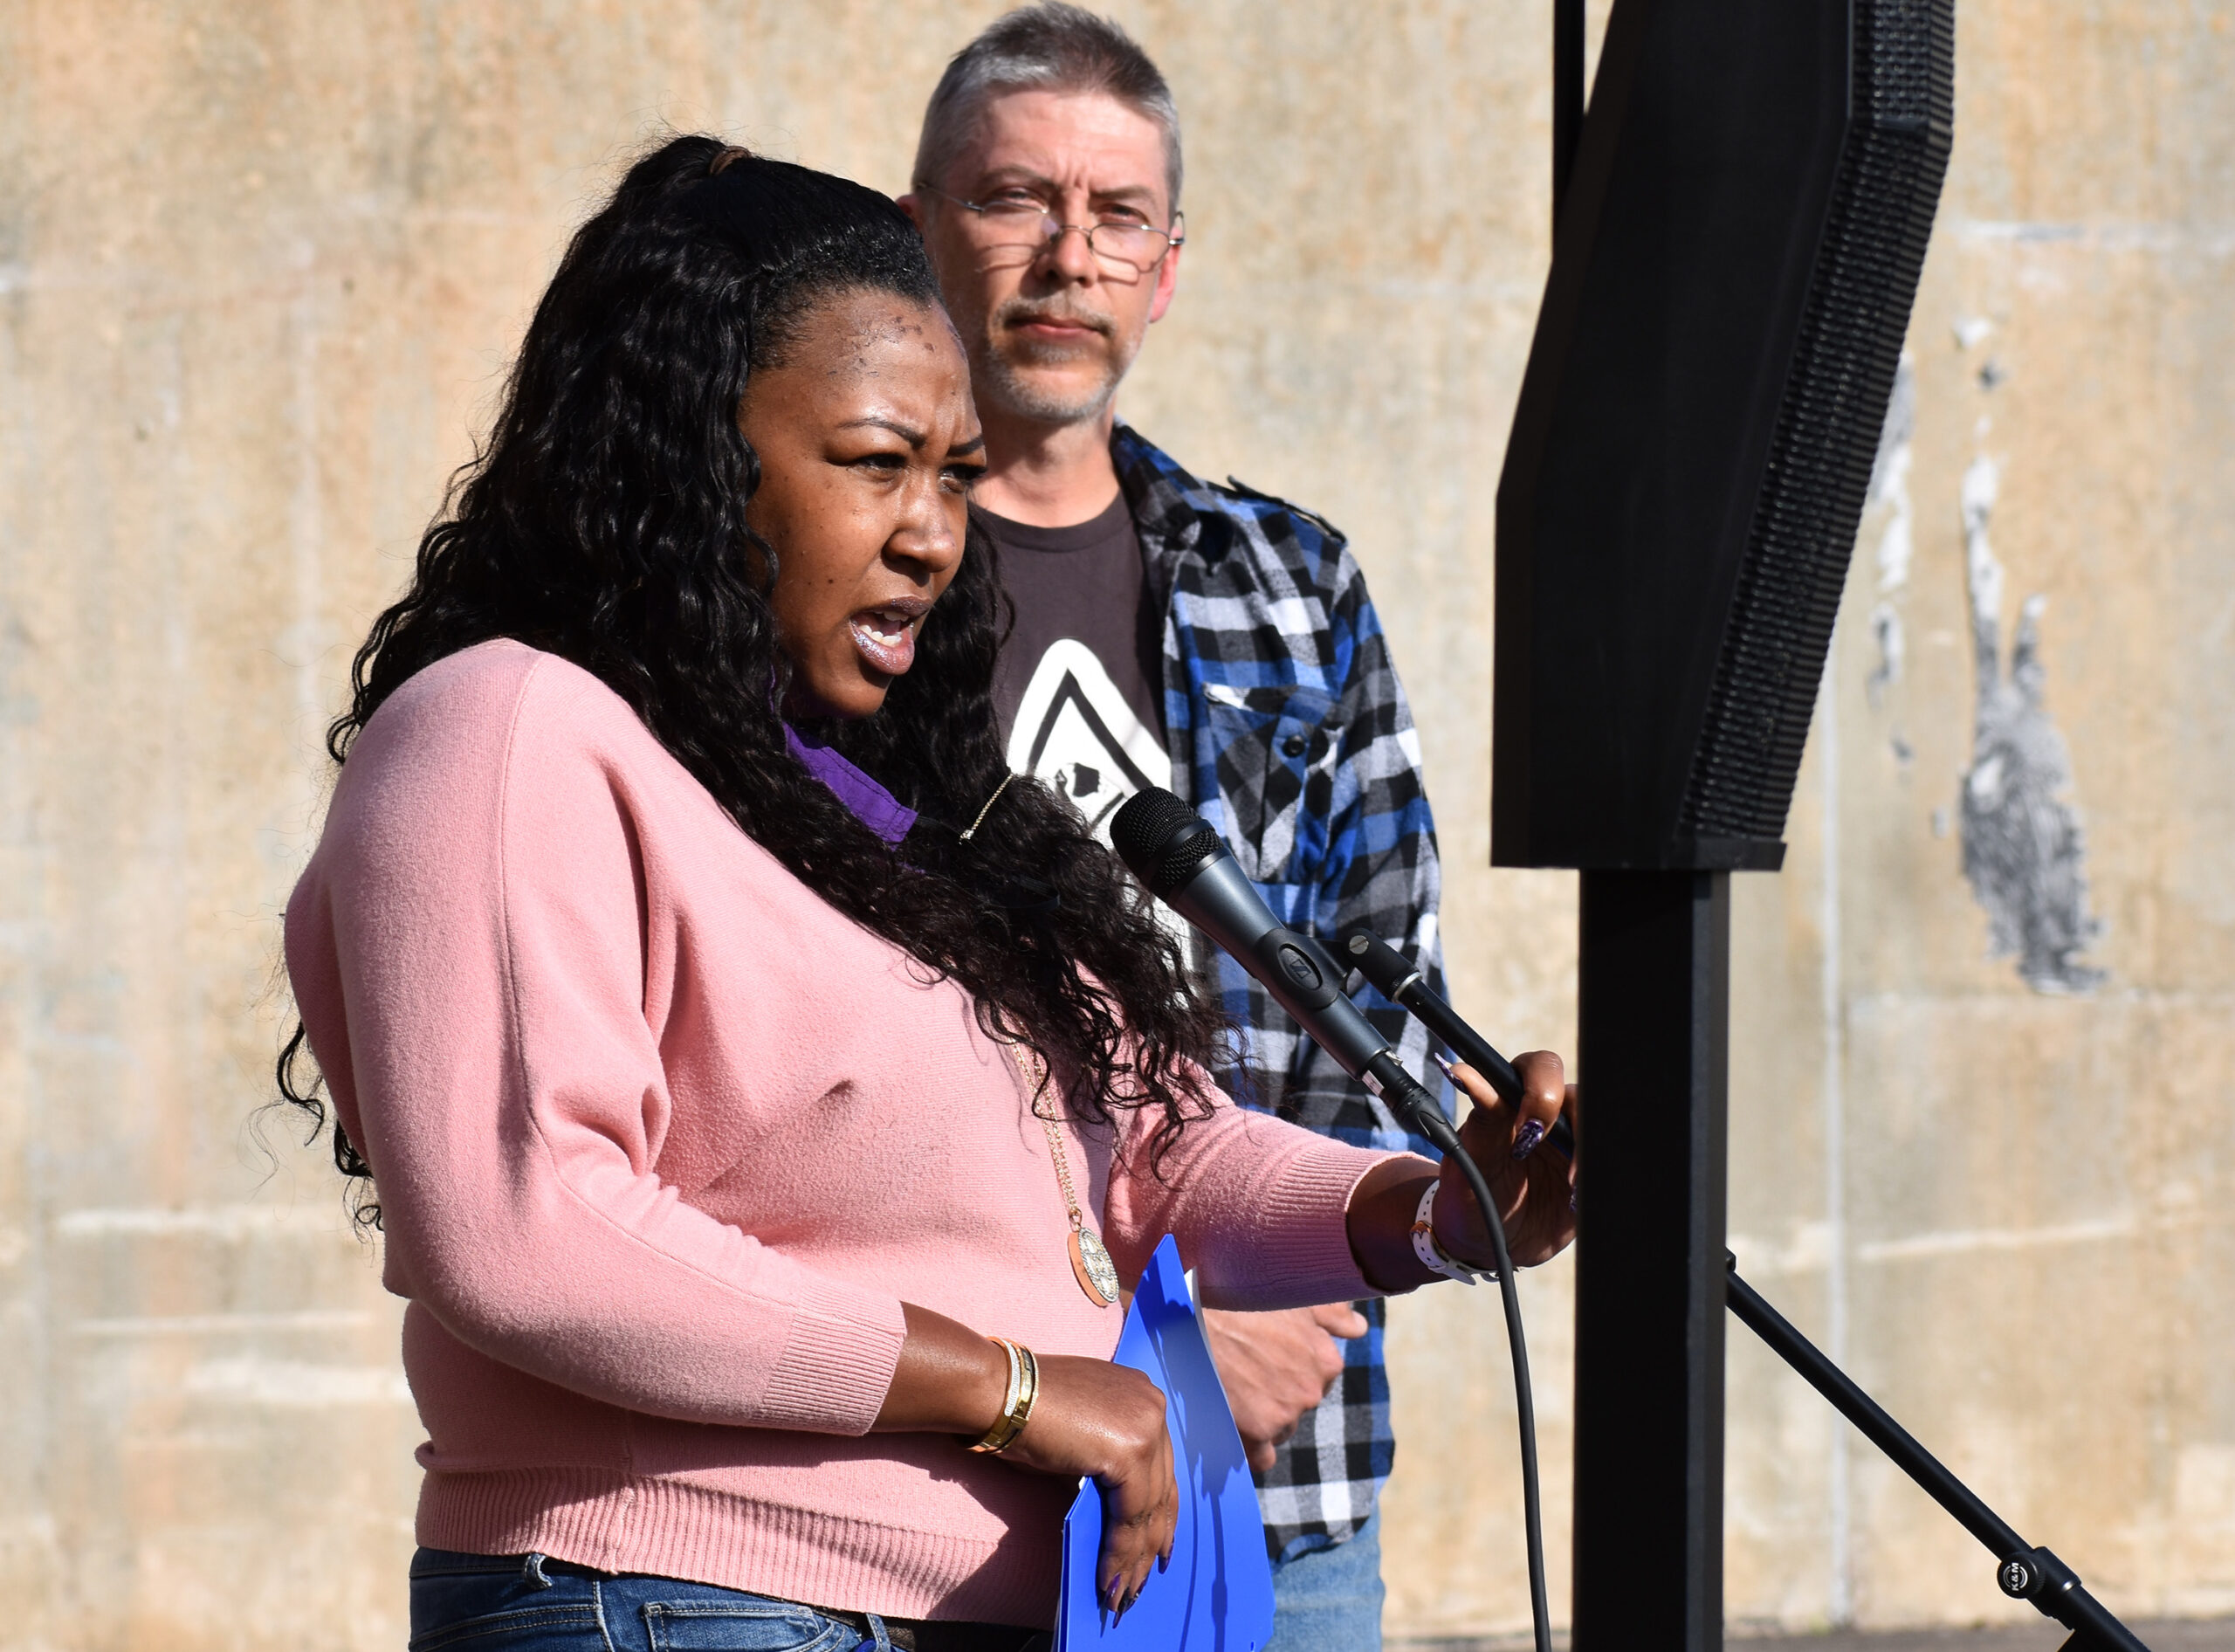 La'Tanya Campbell speaks during a town hall meeting on Marathon County's proposed "Community for All" resolution